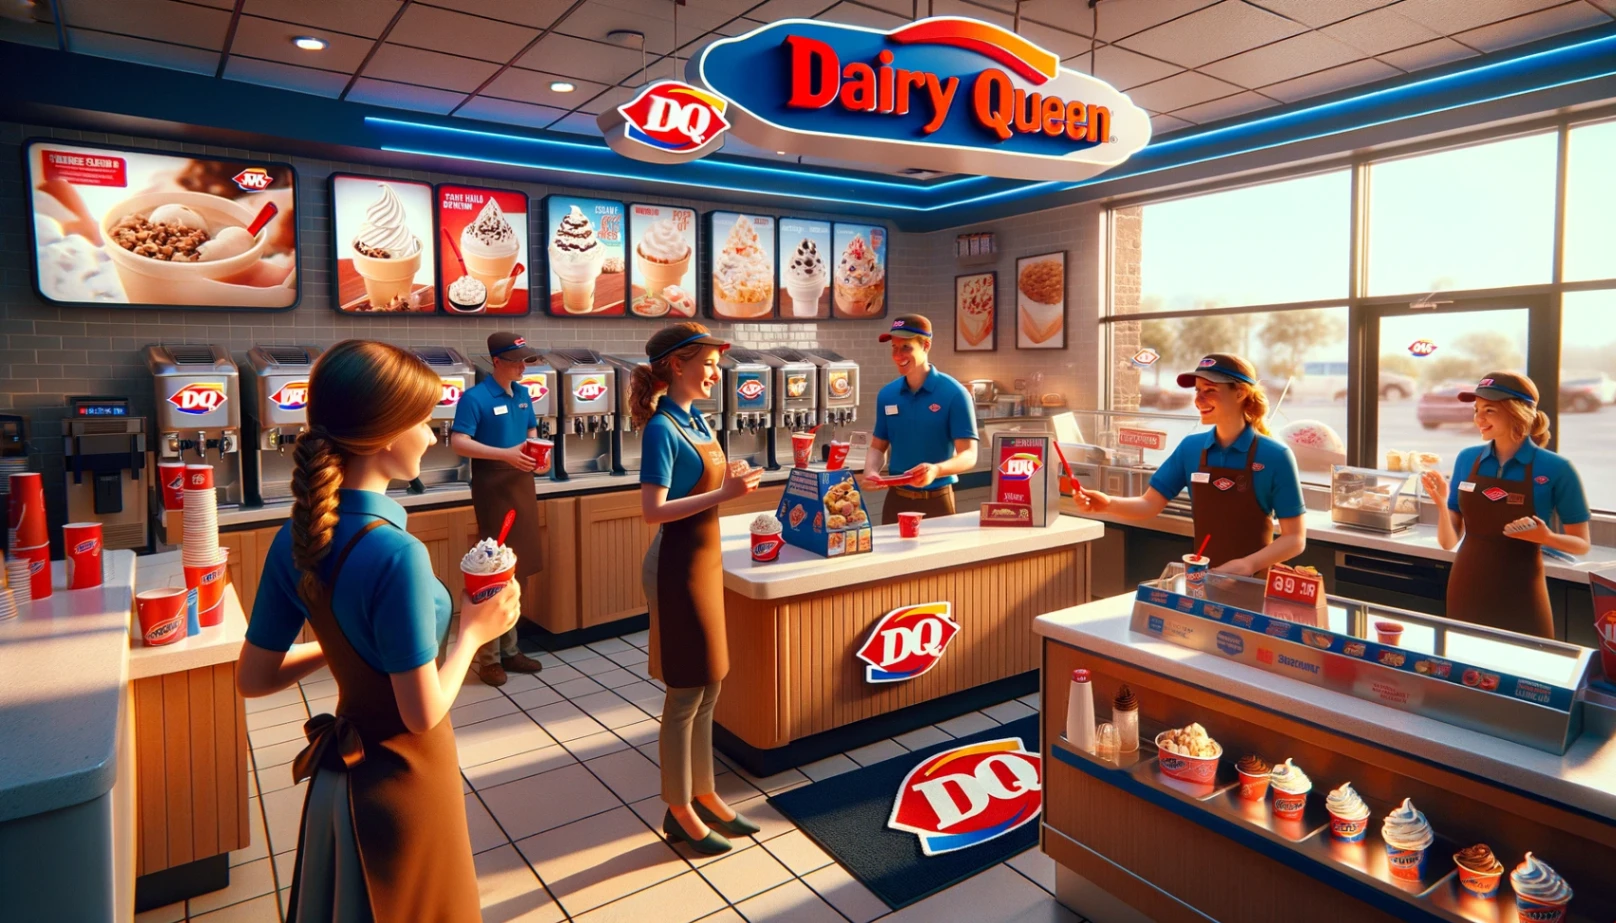 Learn How to Apply for Positions at Dairy Queen